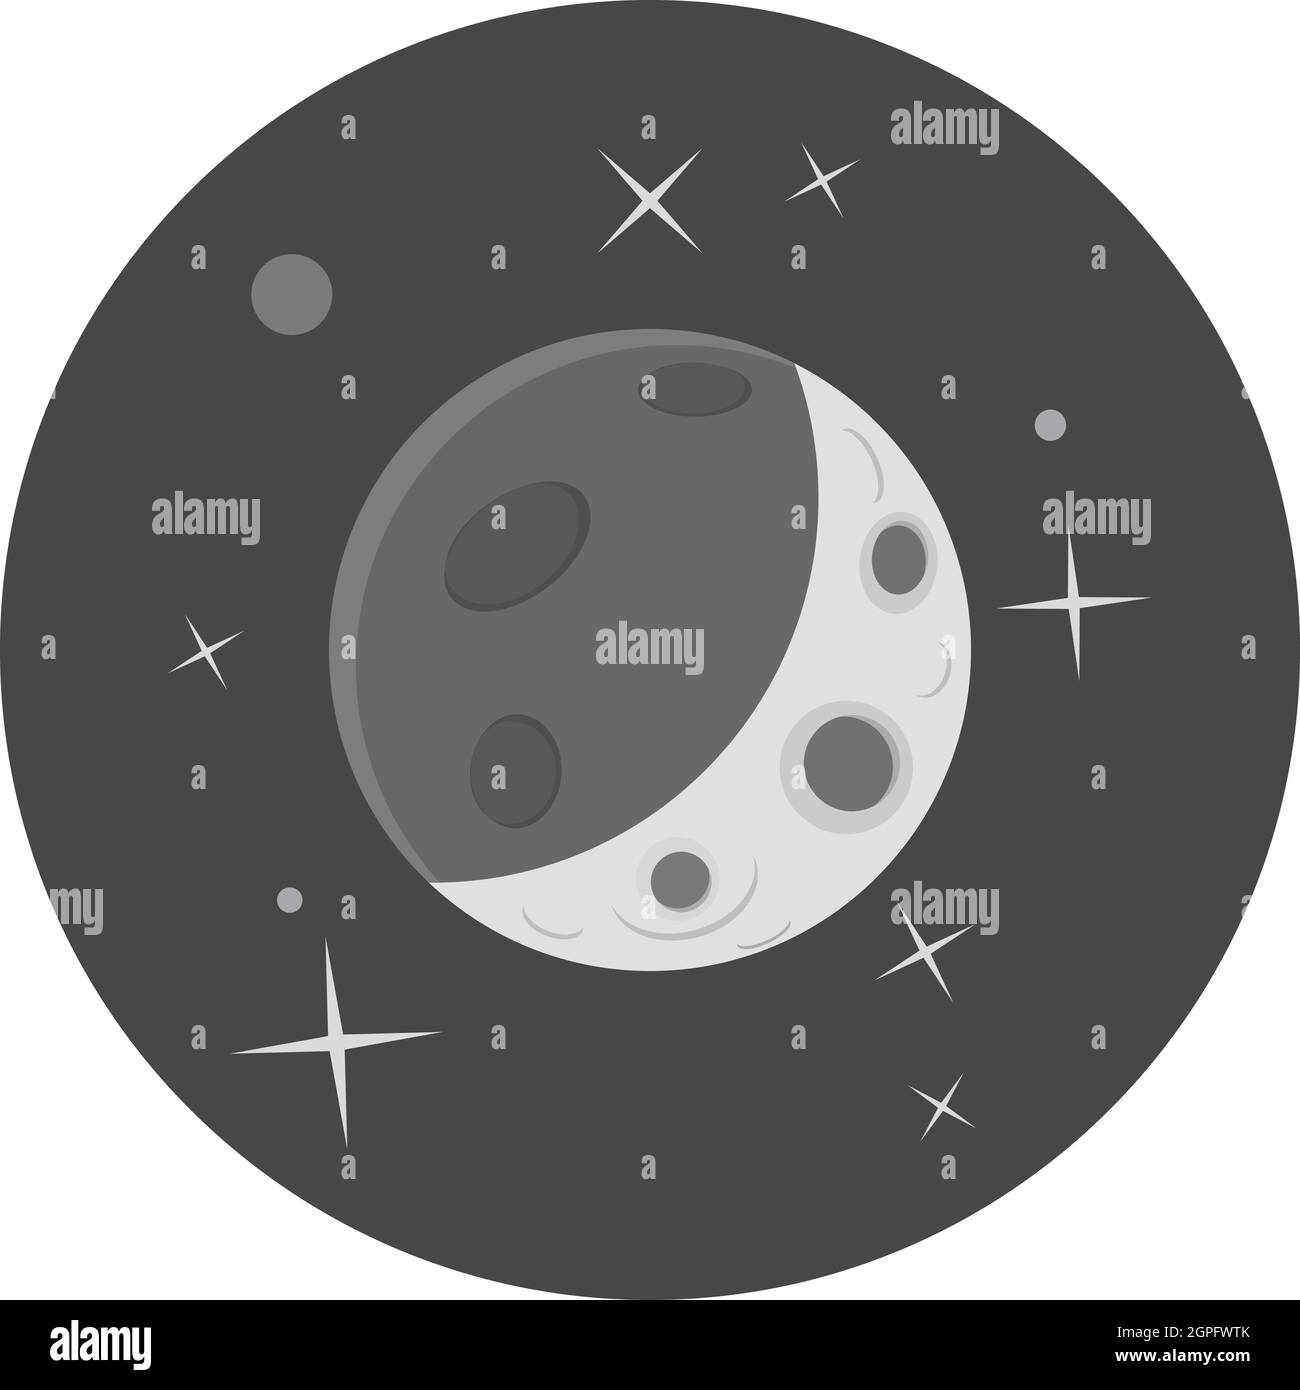 Planet in space icon, gray monochrome style Stock Vector